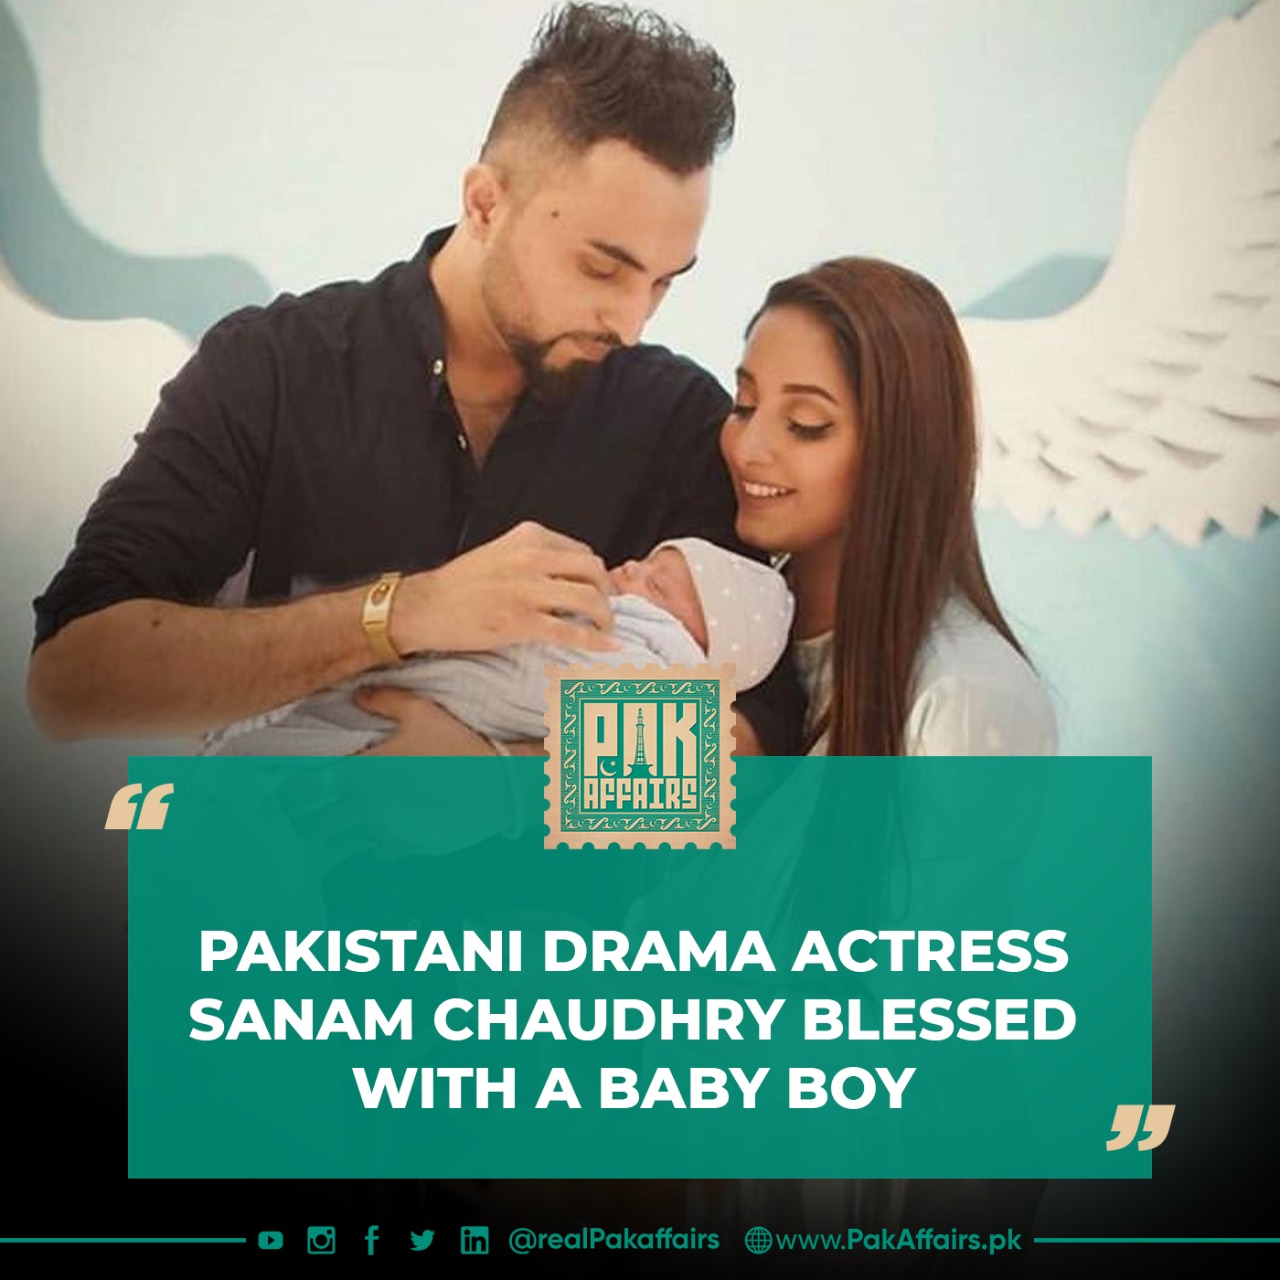 Pakistani drama actress Sanam Chaudhry blessed with a baby boy